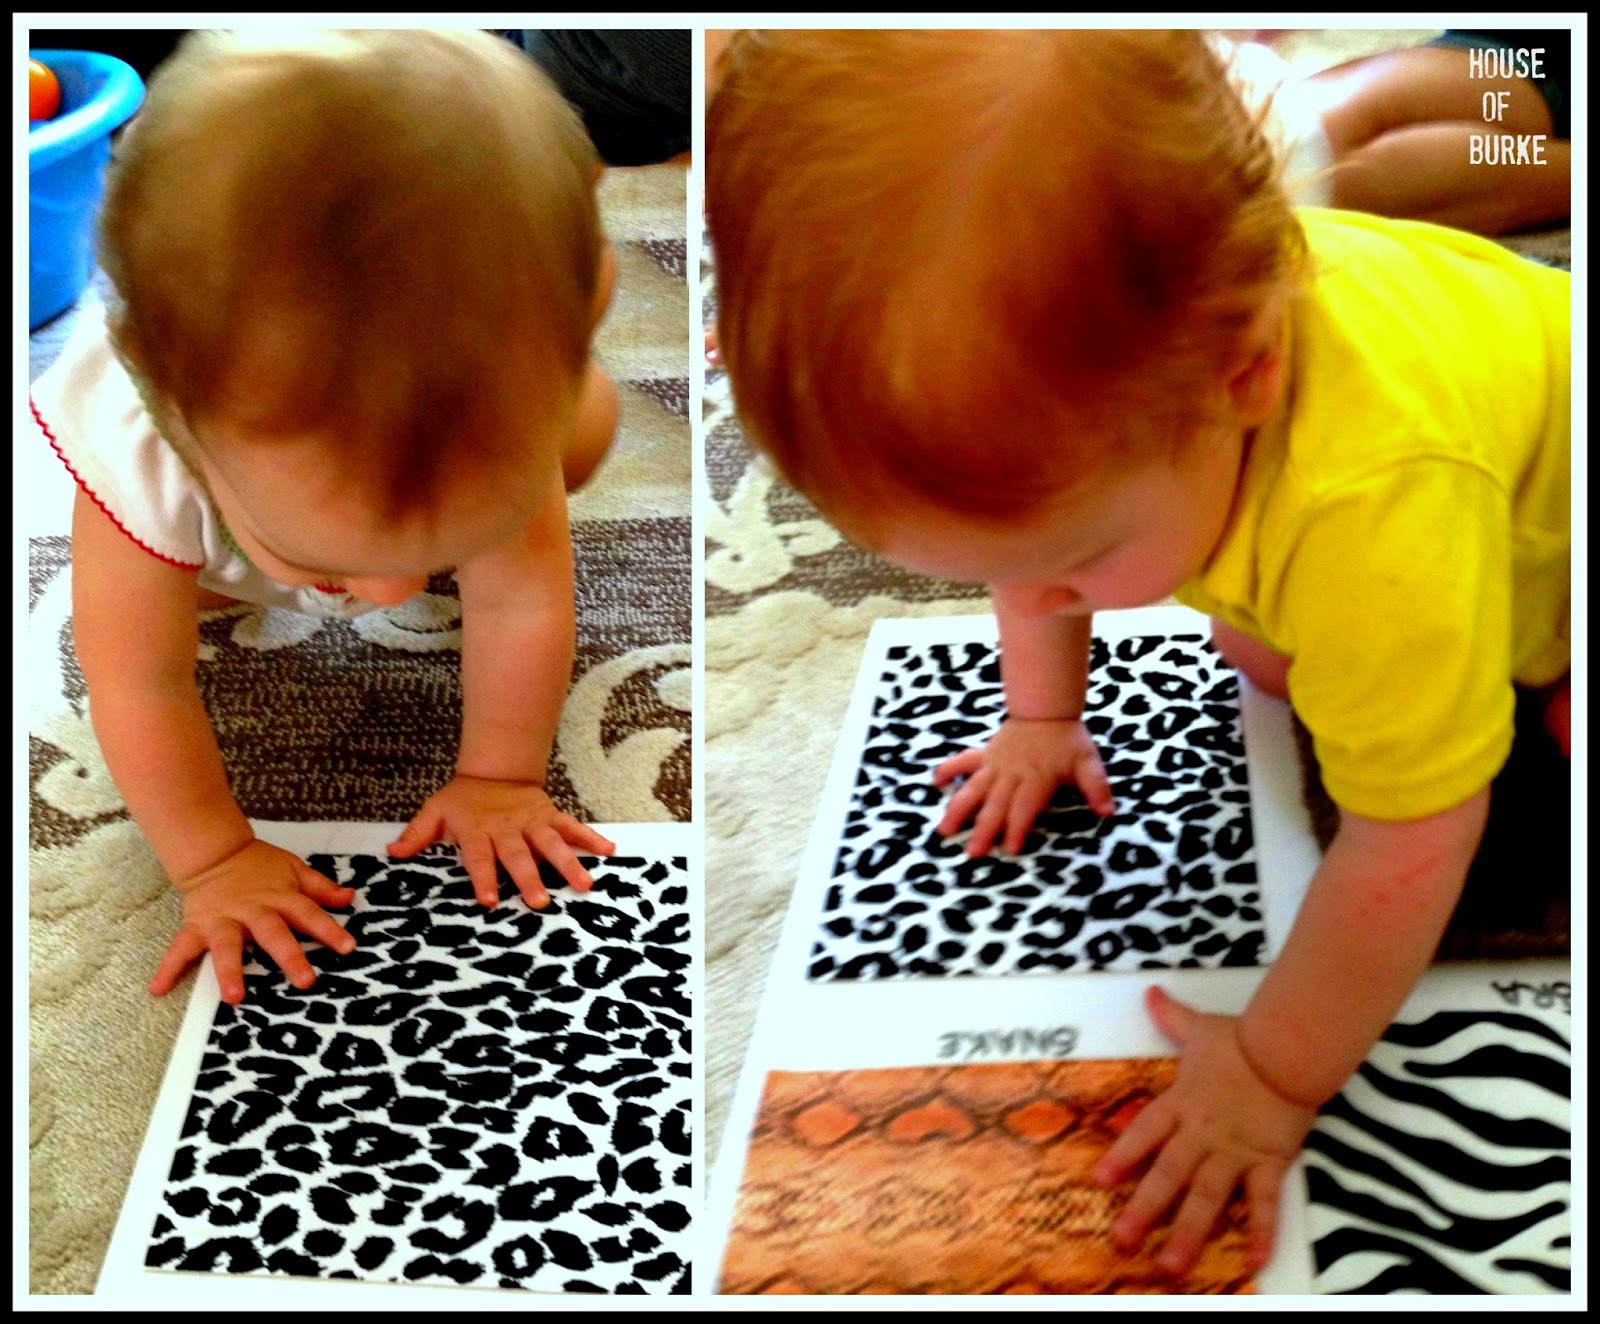 House of Burke: Animal Texture Board: Teaching Baby About Animals Through  Sensory Play